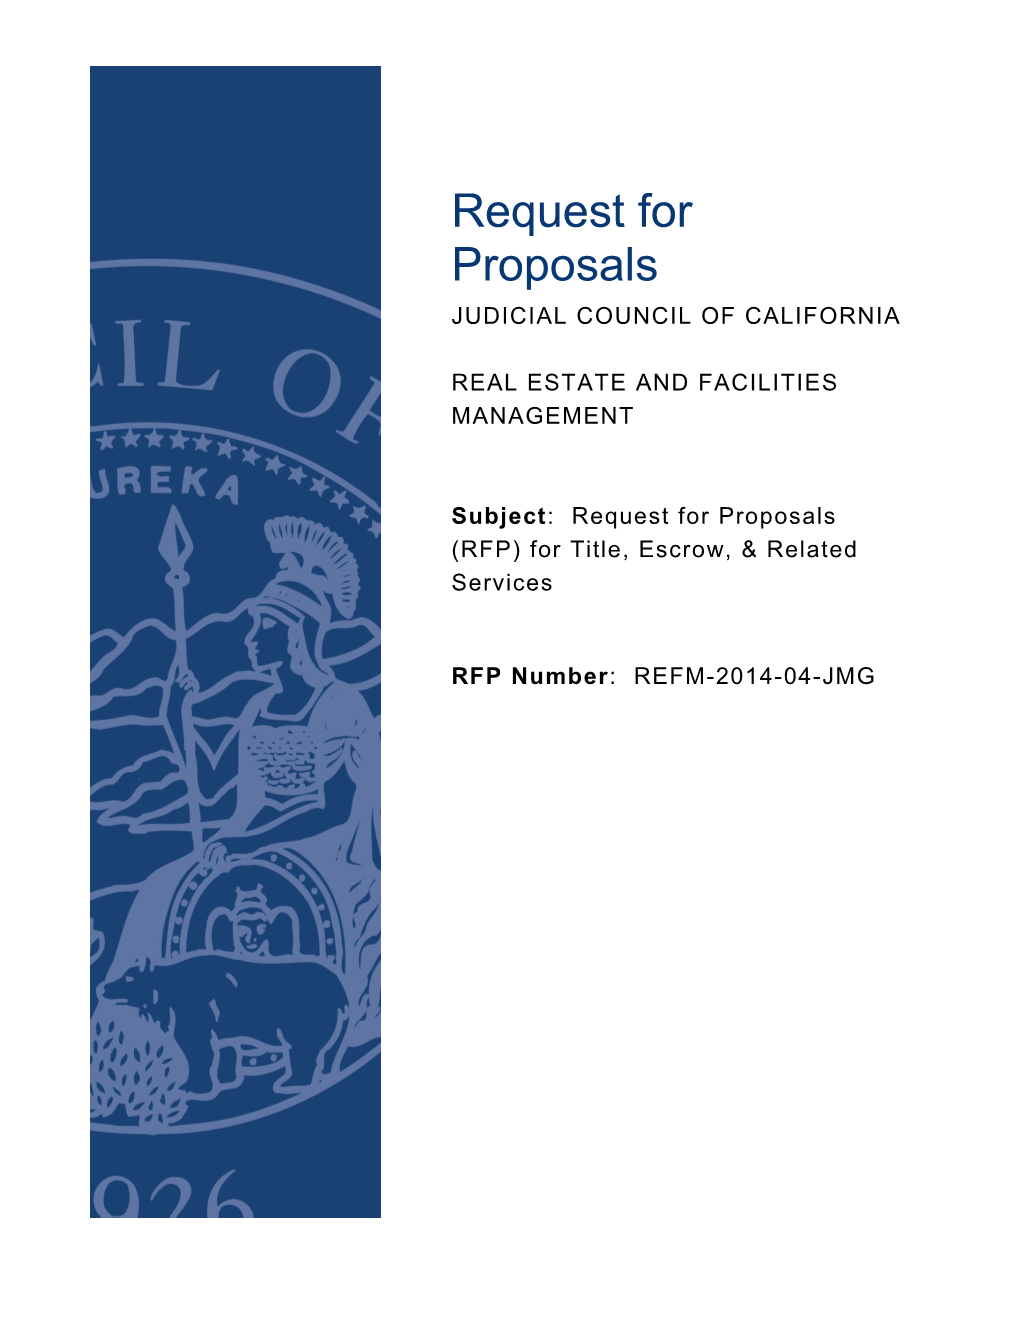 REFM-2014-04-JMG RFP for Title, Escrow & Related Services